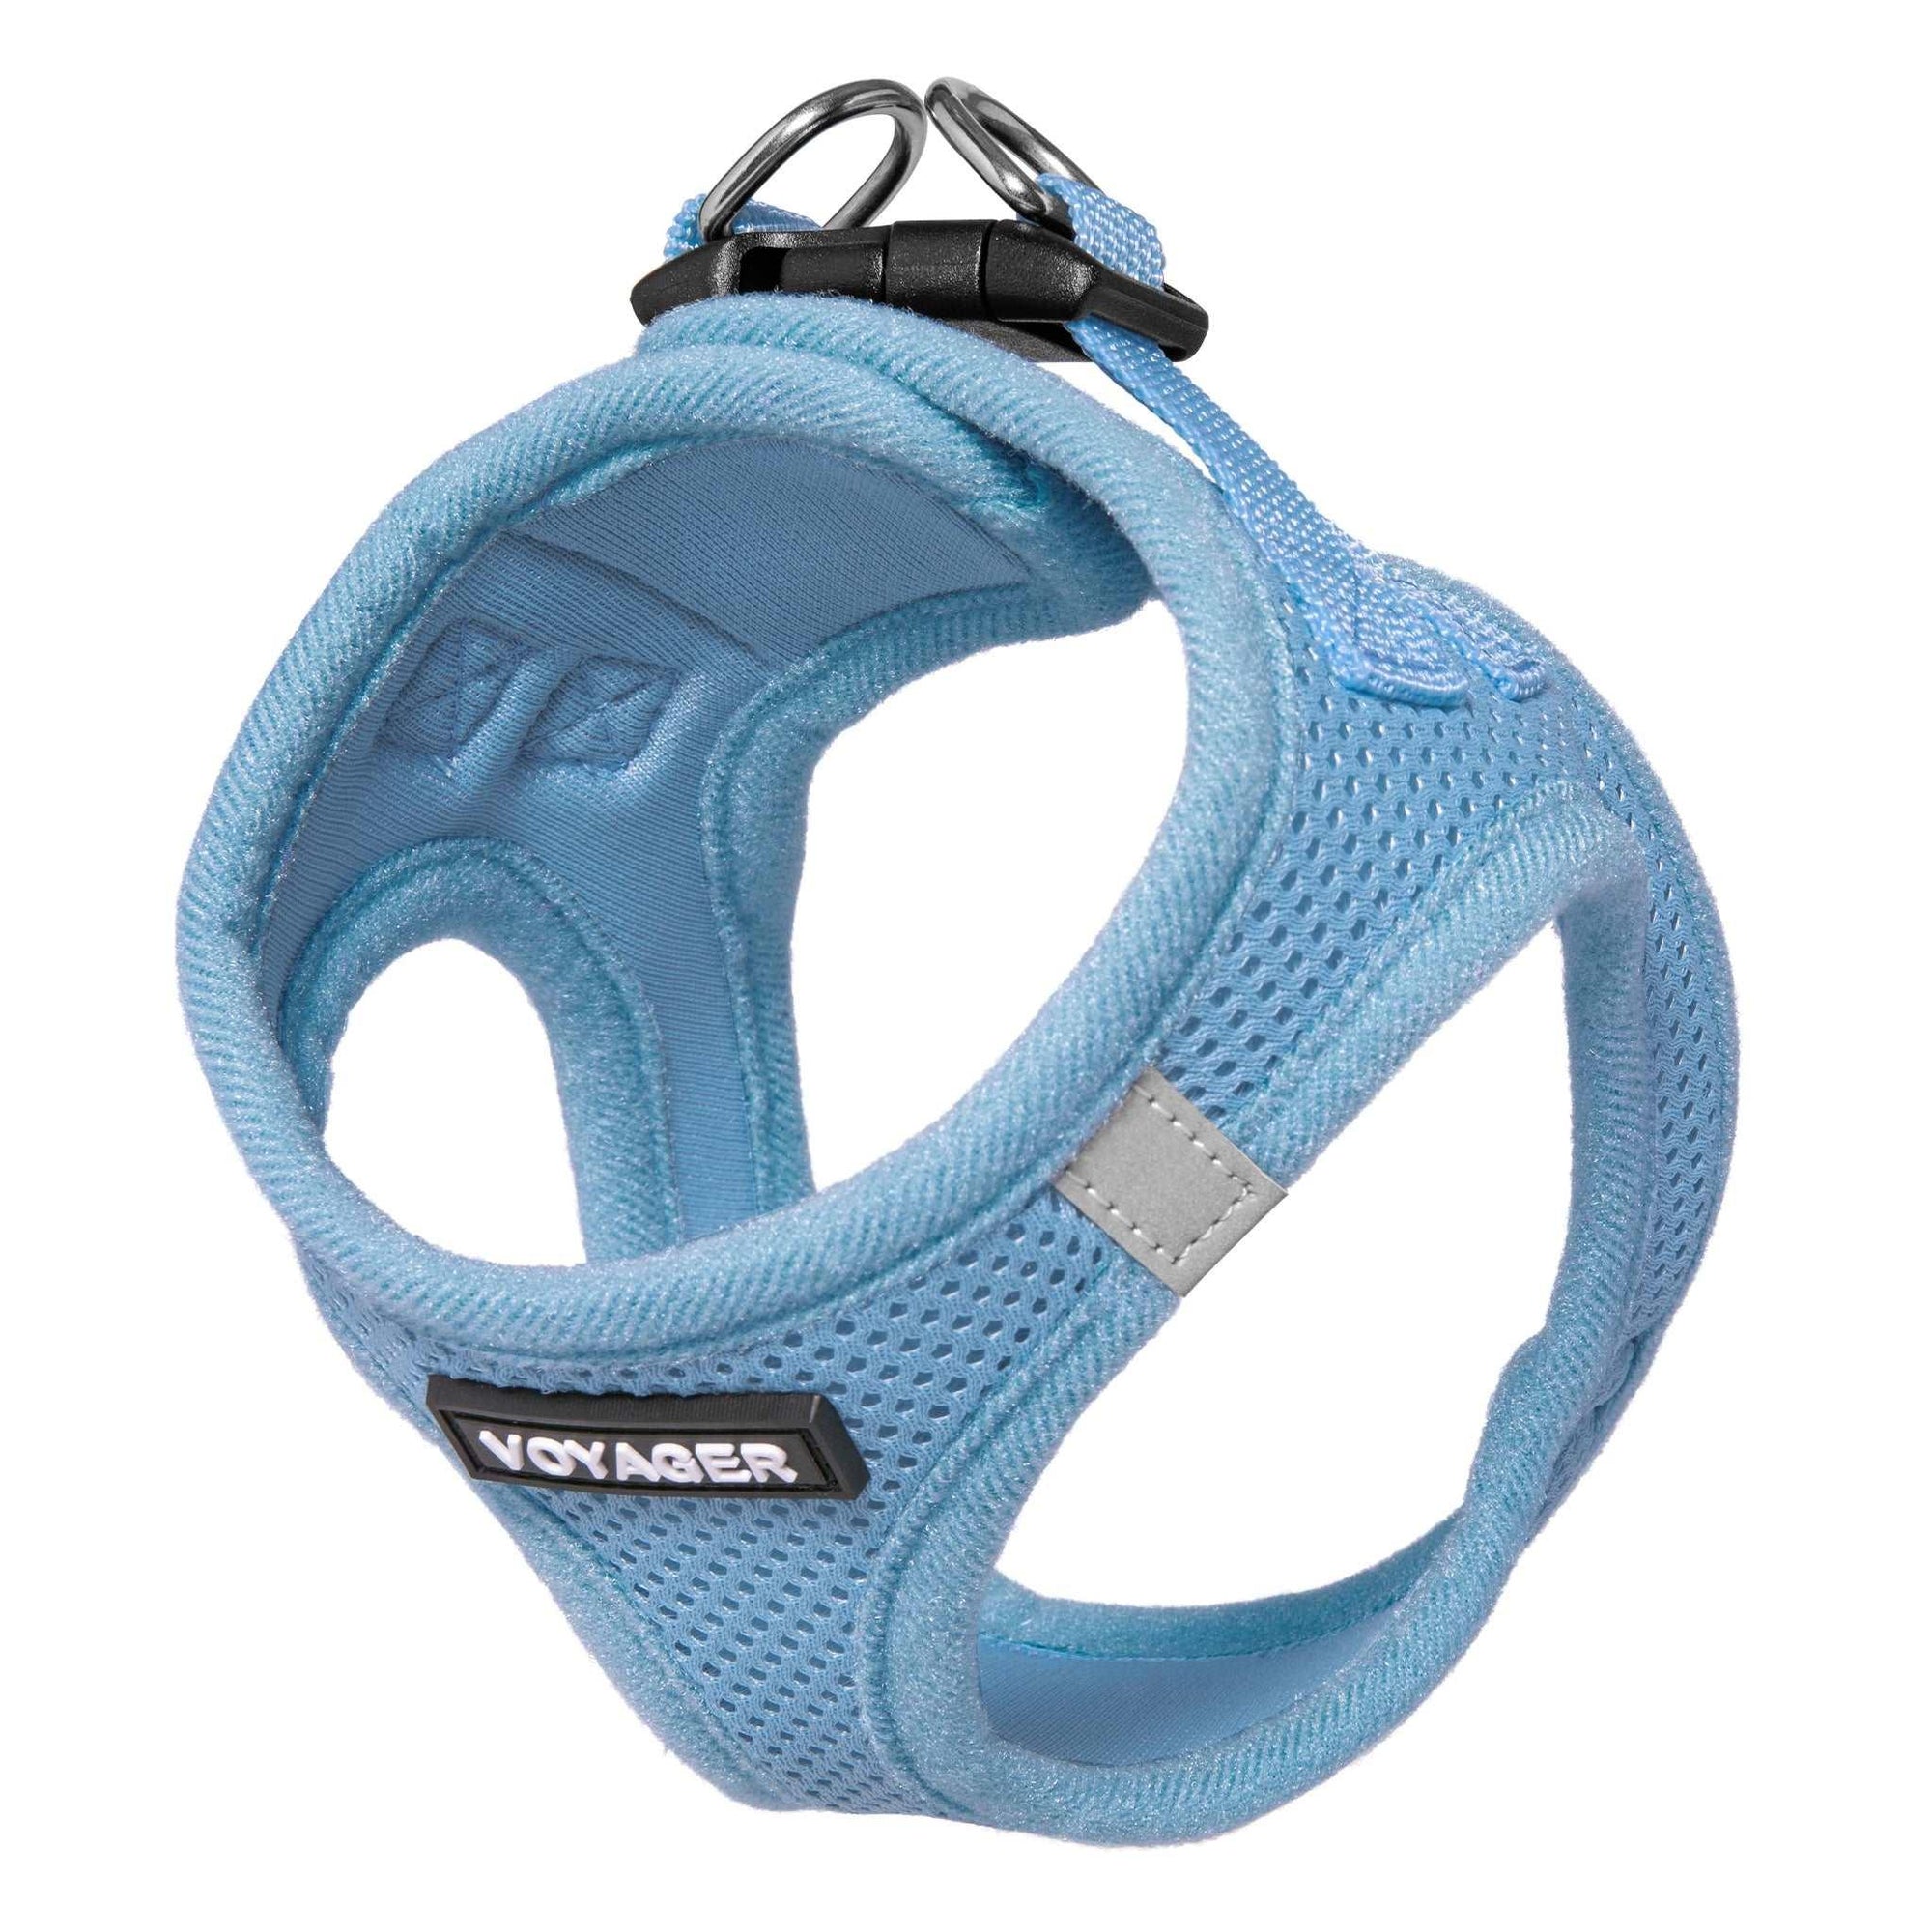 VOYAGER Step-In Air Pet Harness in Baby Blue with Matching Trim and Webbing - Expanded